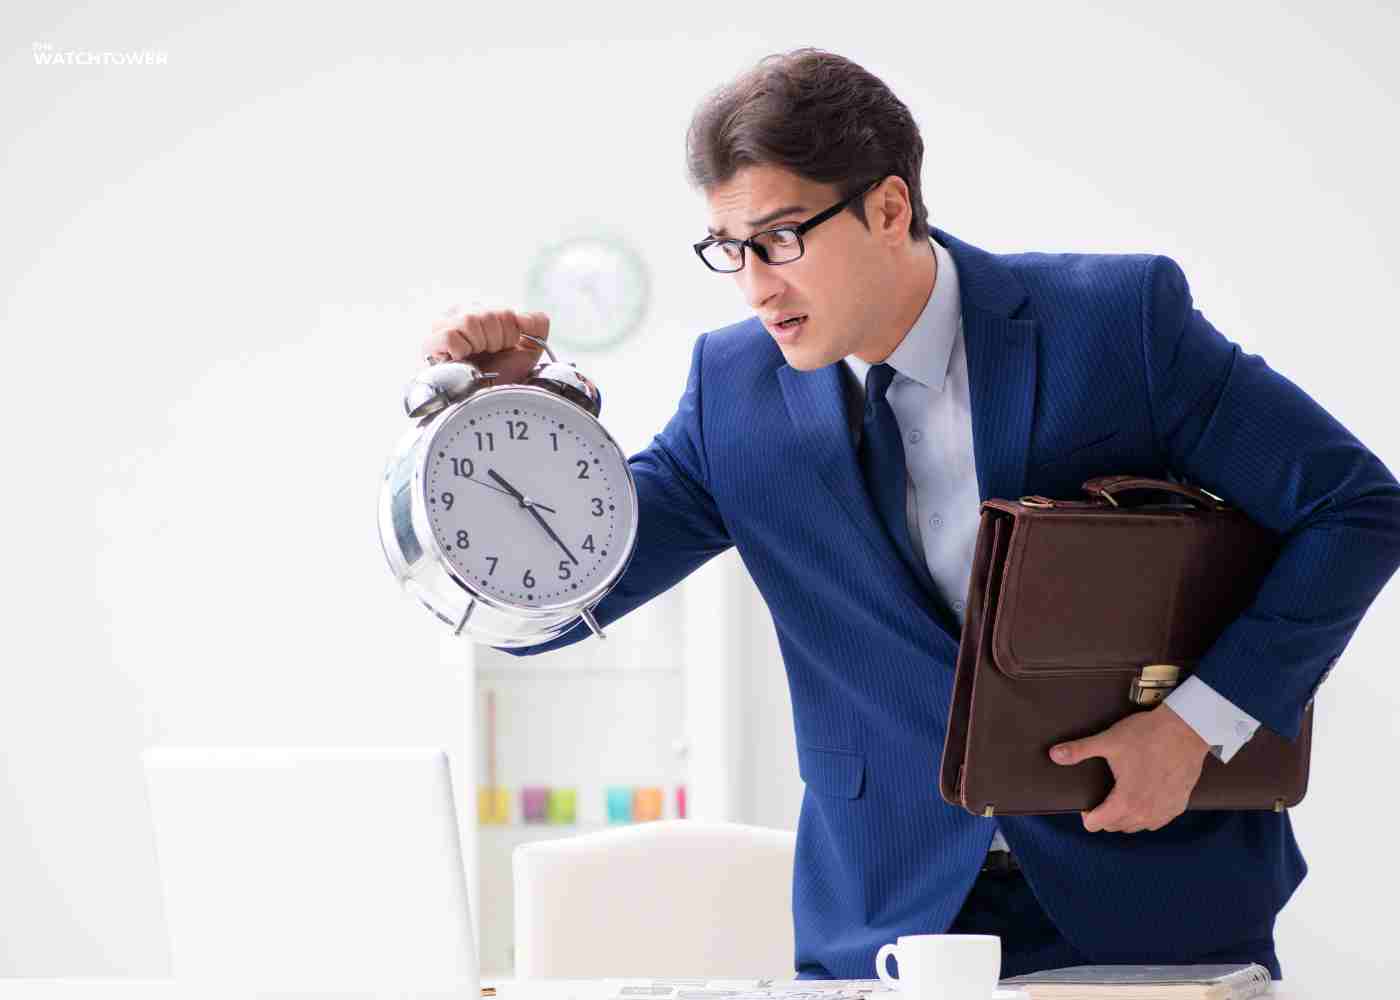 5 Best Practices to Prevent and Detect Employee Time Theft